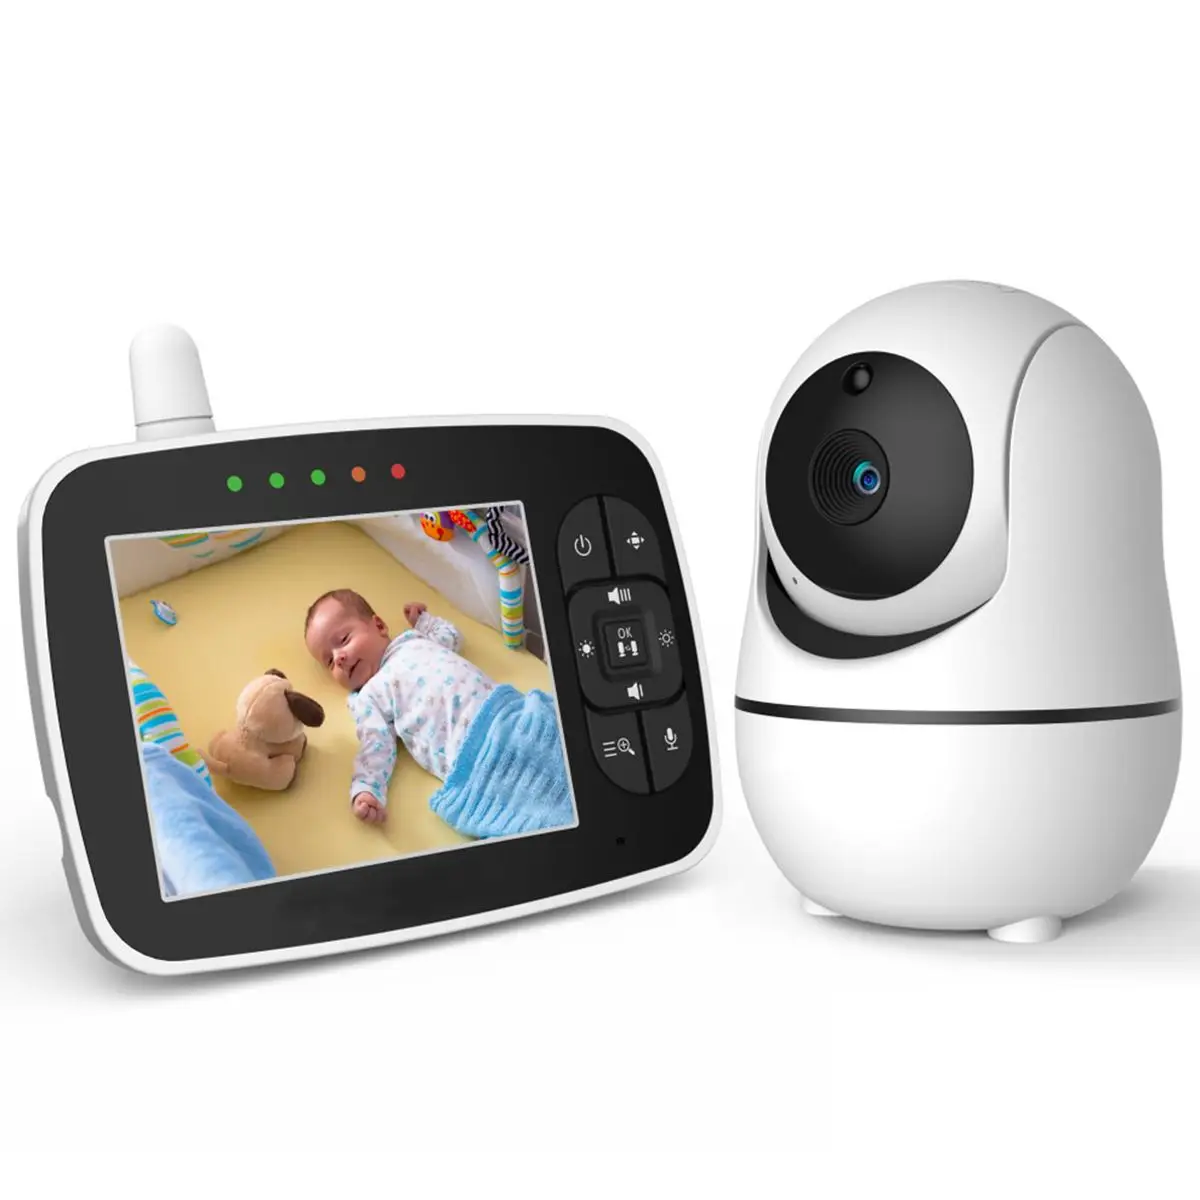 2.4Ghz FHss GFSK 18DBM Max Baby Monitor with Remote Pan-Tilt-Zoom Camera and 3.5'' LCD Screen, Infrared Night Vision